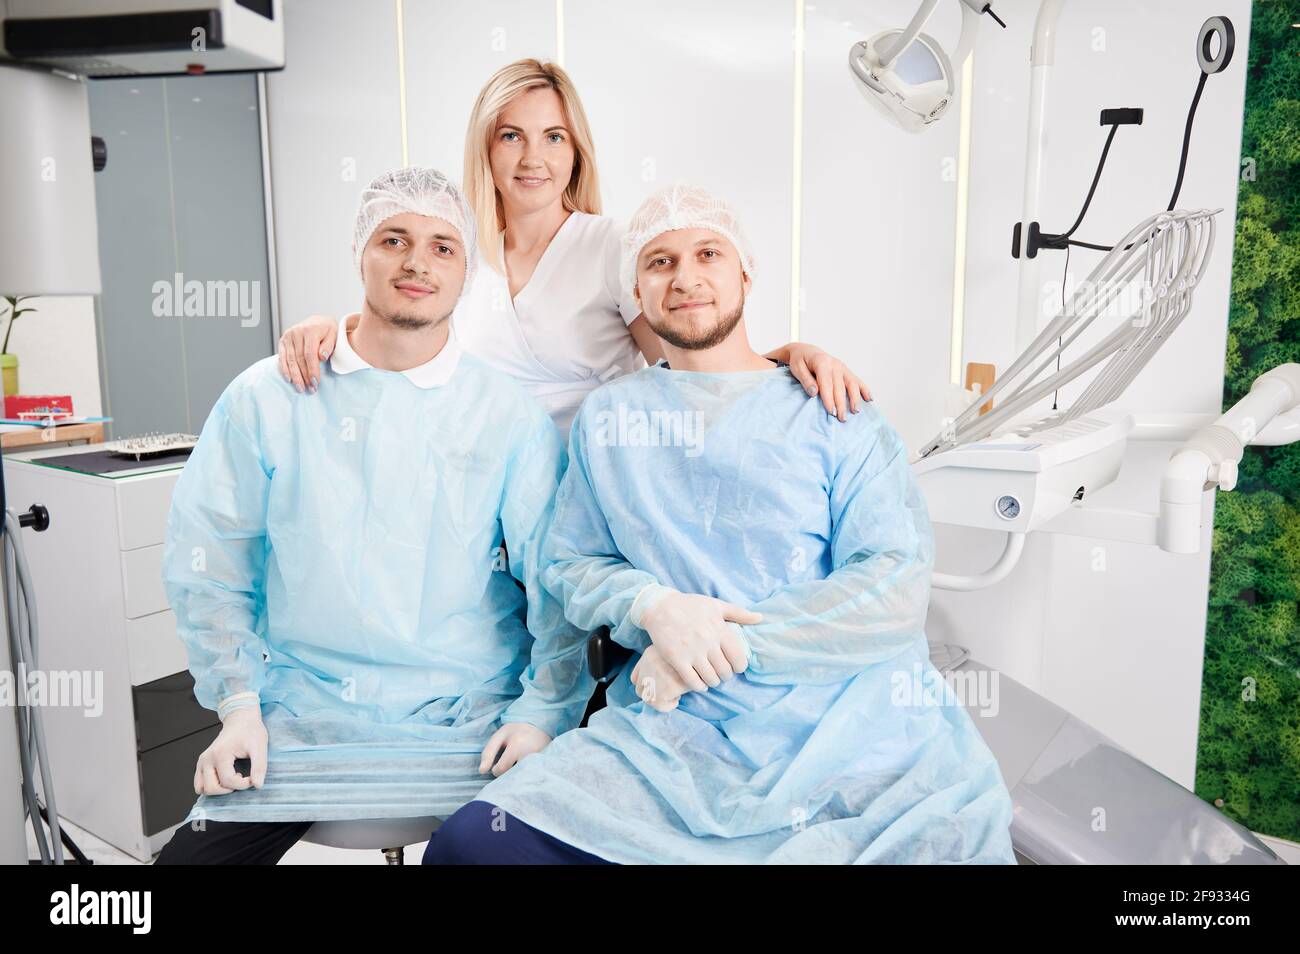 Front view of handsome male stomatologists in medical protective suits looking at camera and smiling while charming female doctor standing behind men. Concept of dentistry and dental staff. Stock Photo